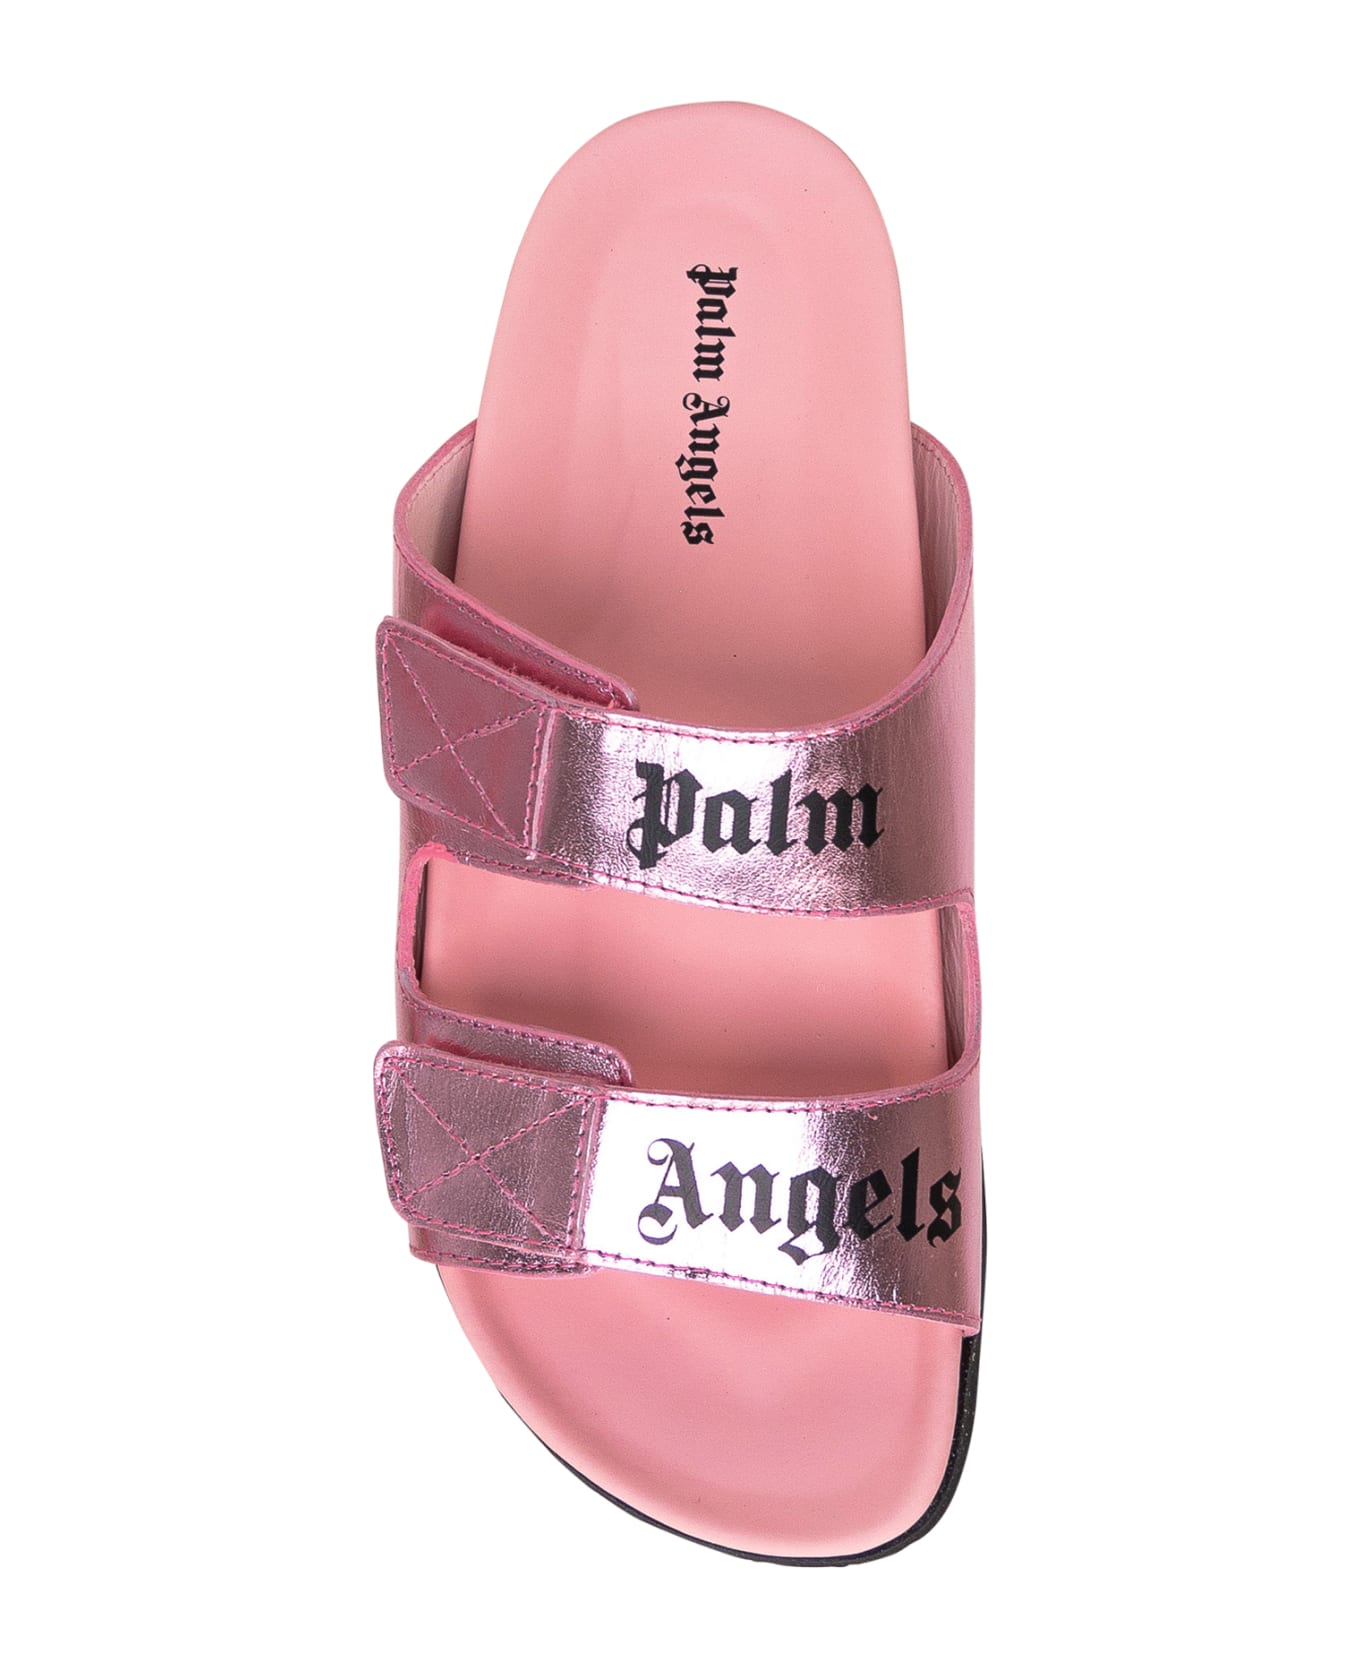 Palm Angels Slide With Logo - PINK PINK